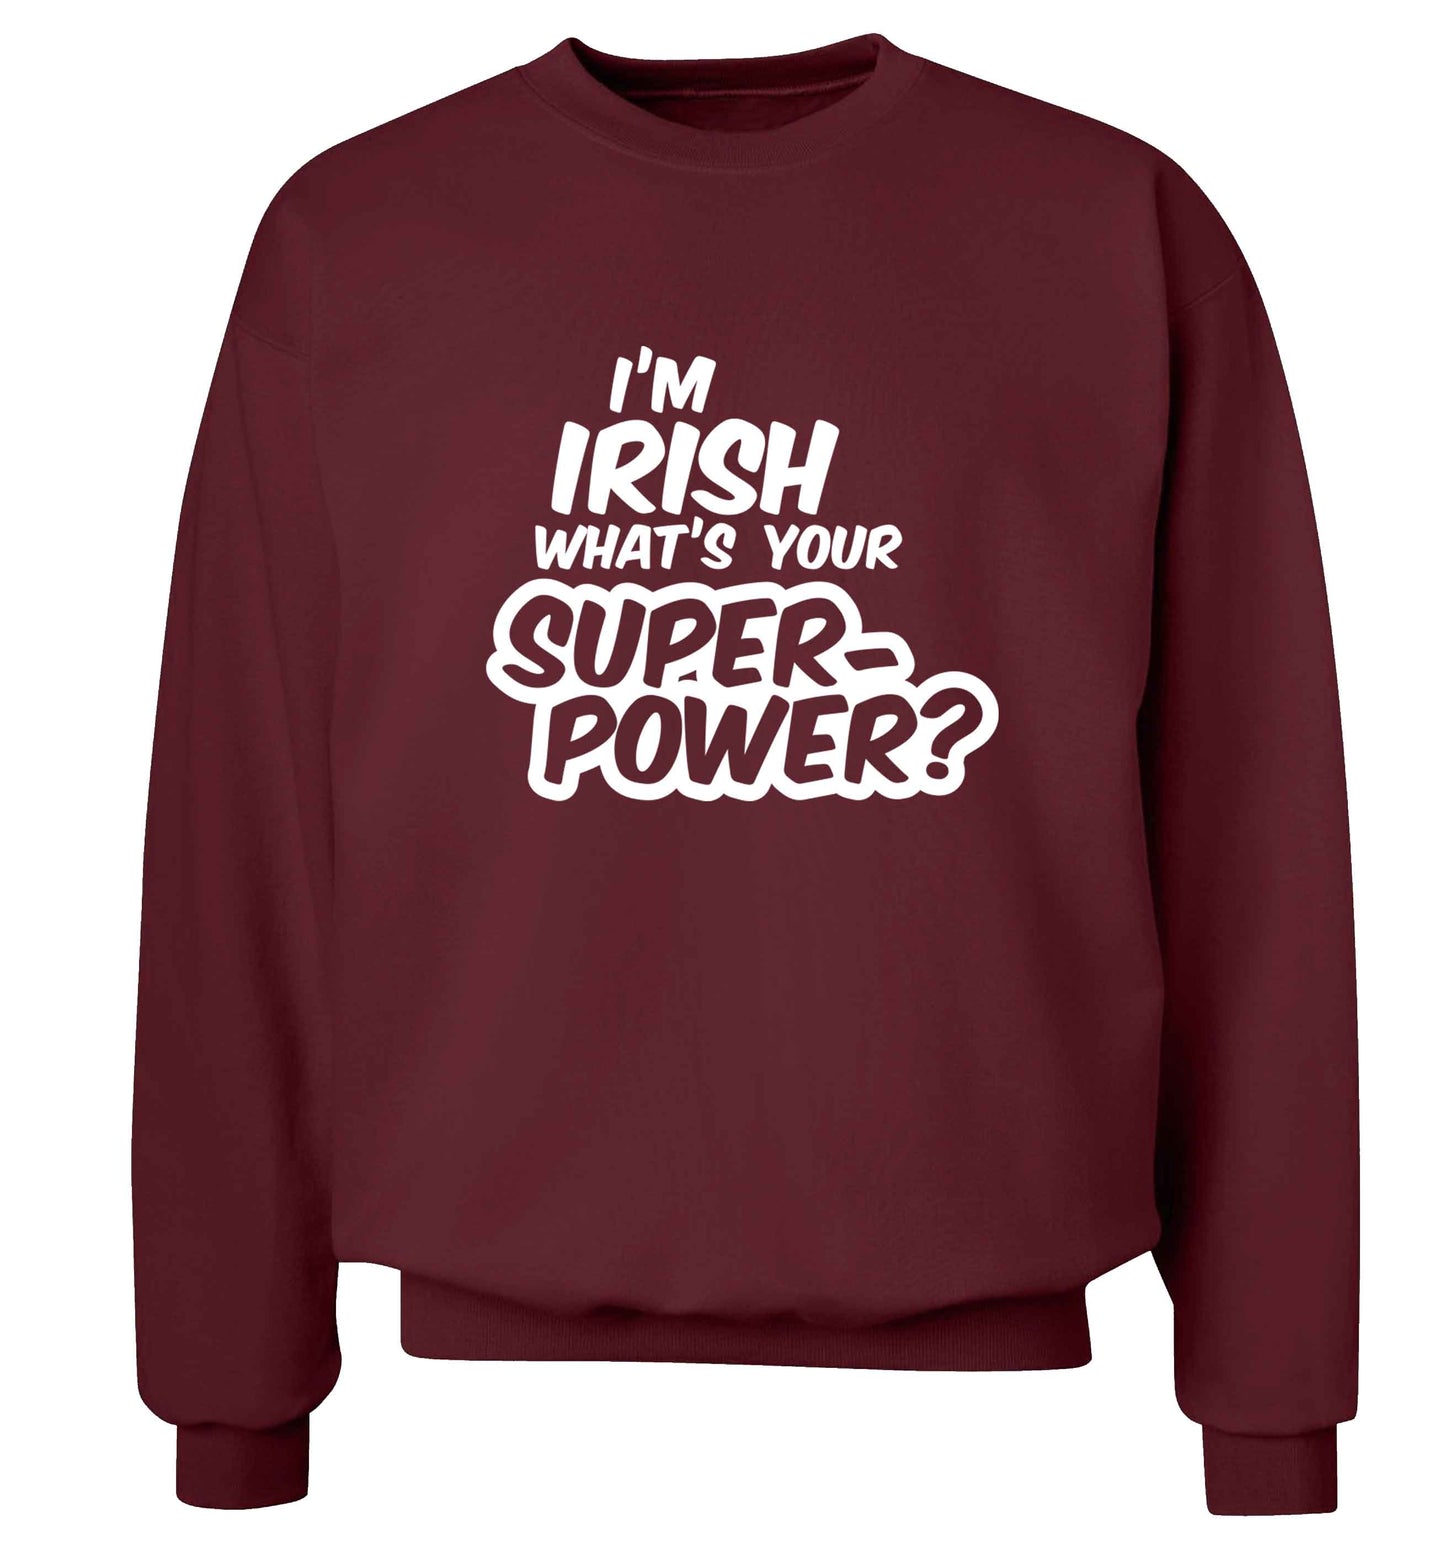 I'm Irish what's your superpower? adult's unisex maroon sweater 2XL